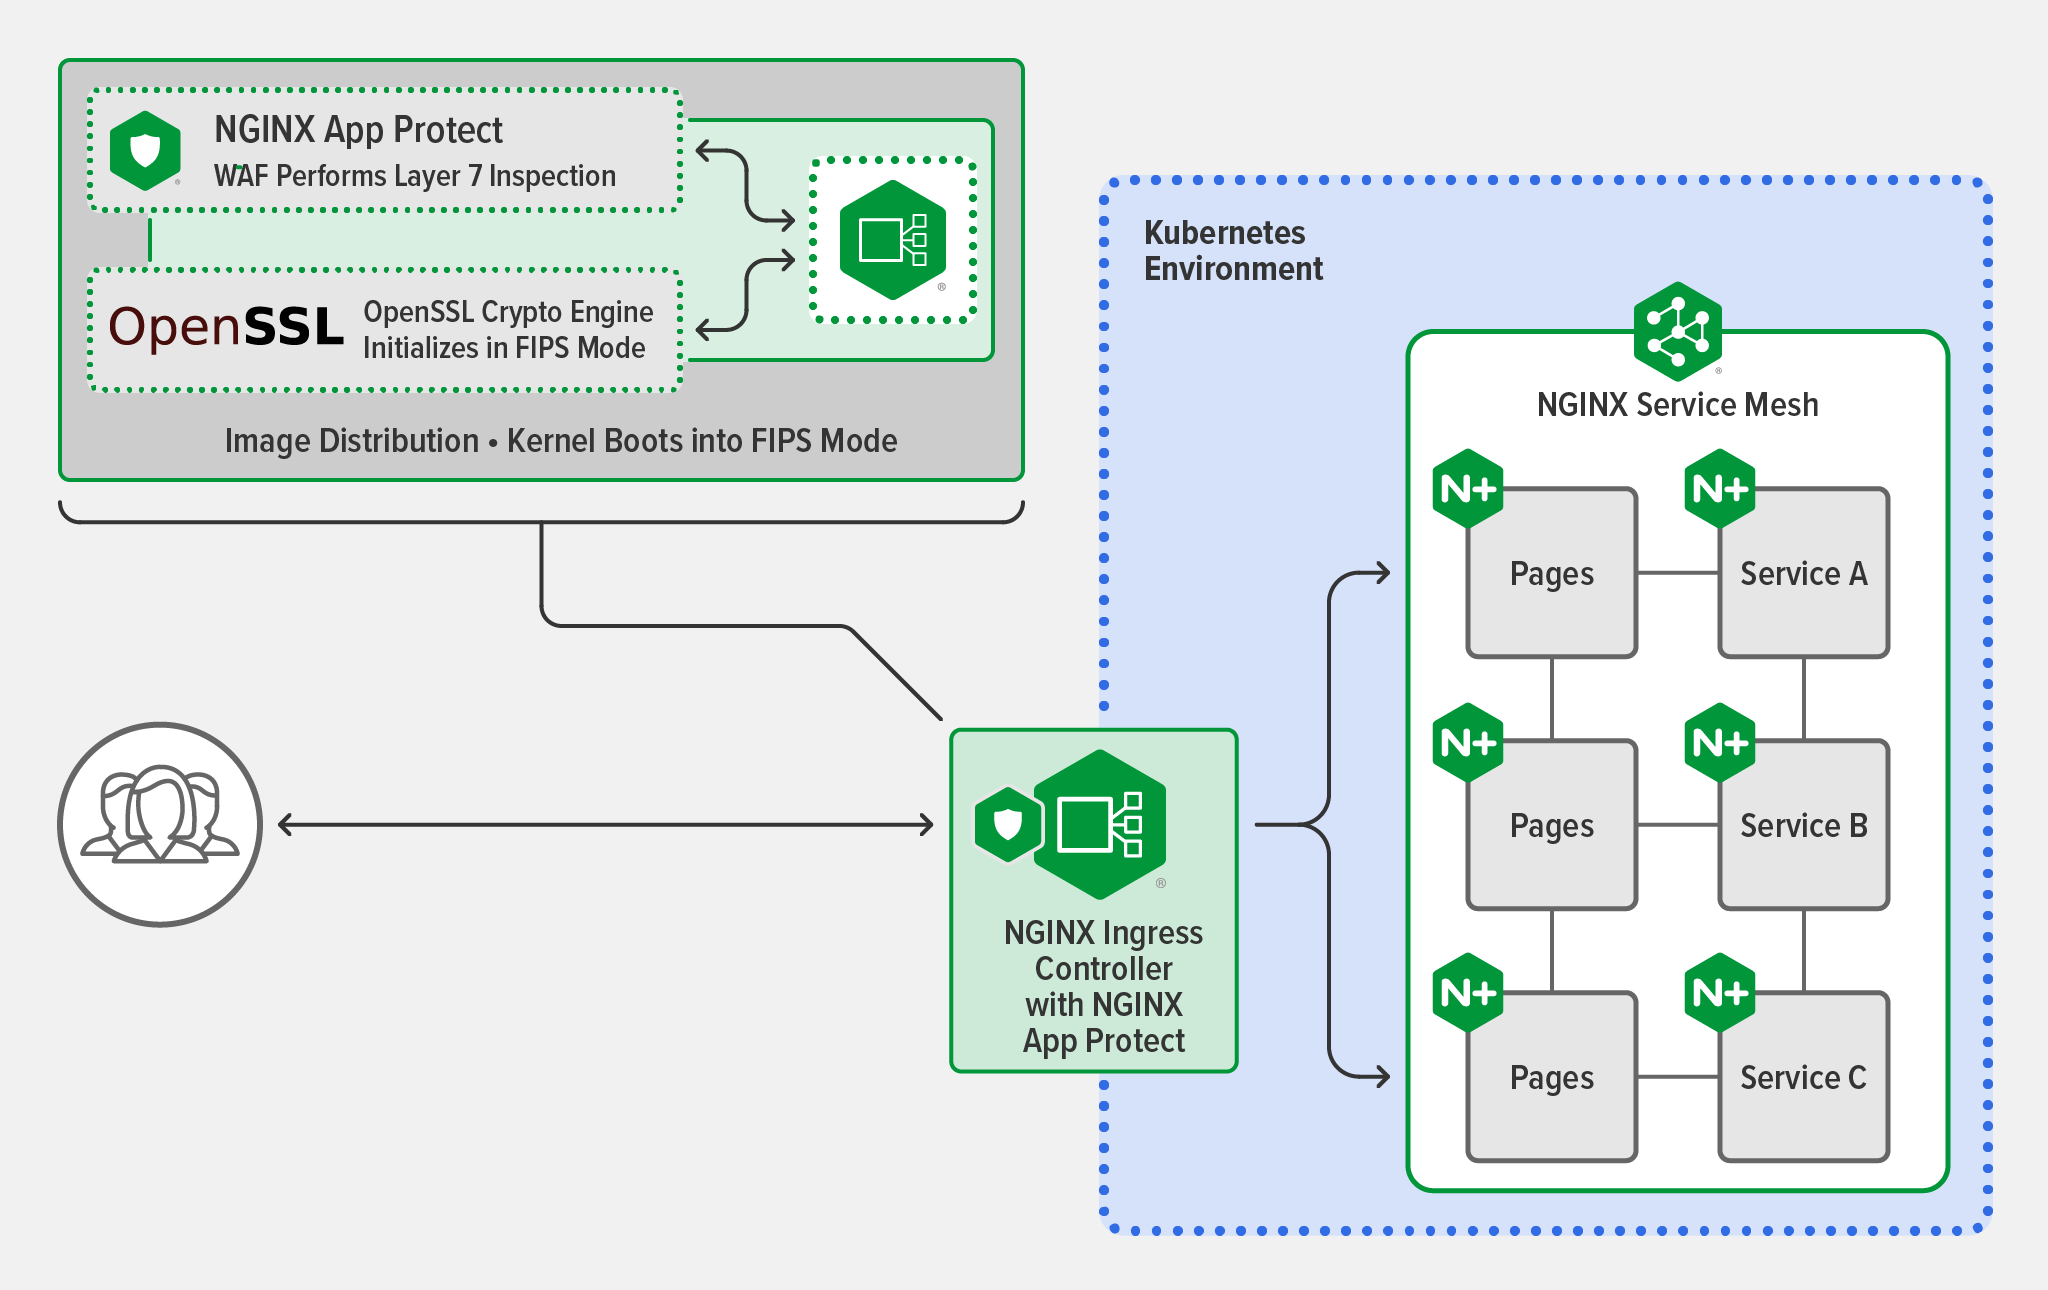 Diagram showing implementation of FIPs in Kubernetes using NGINX Ingress Controller with NGINX App Protect